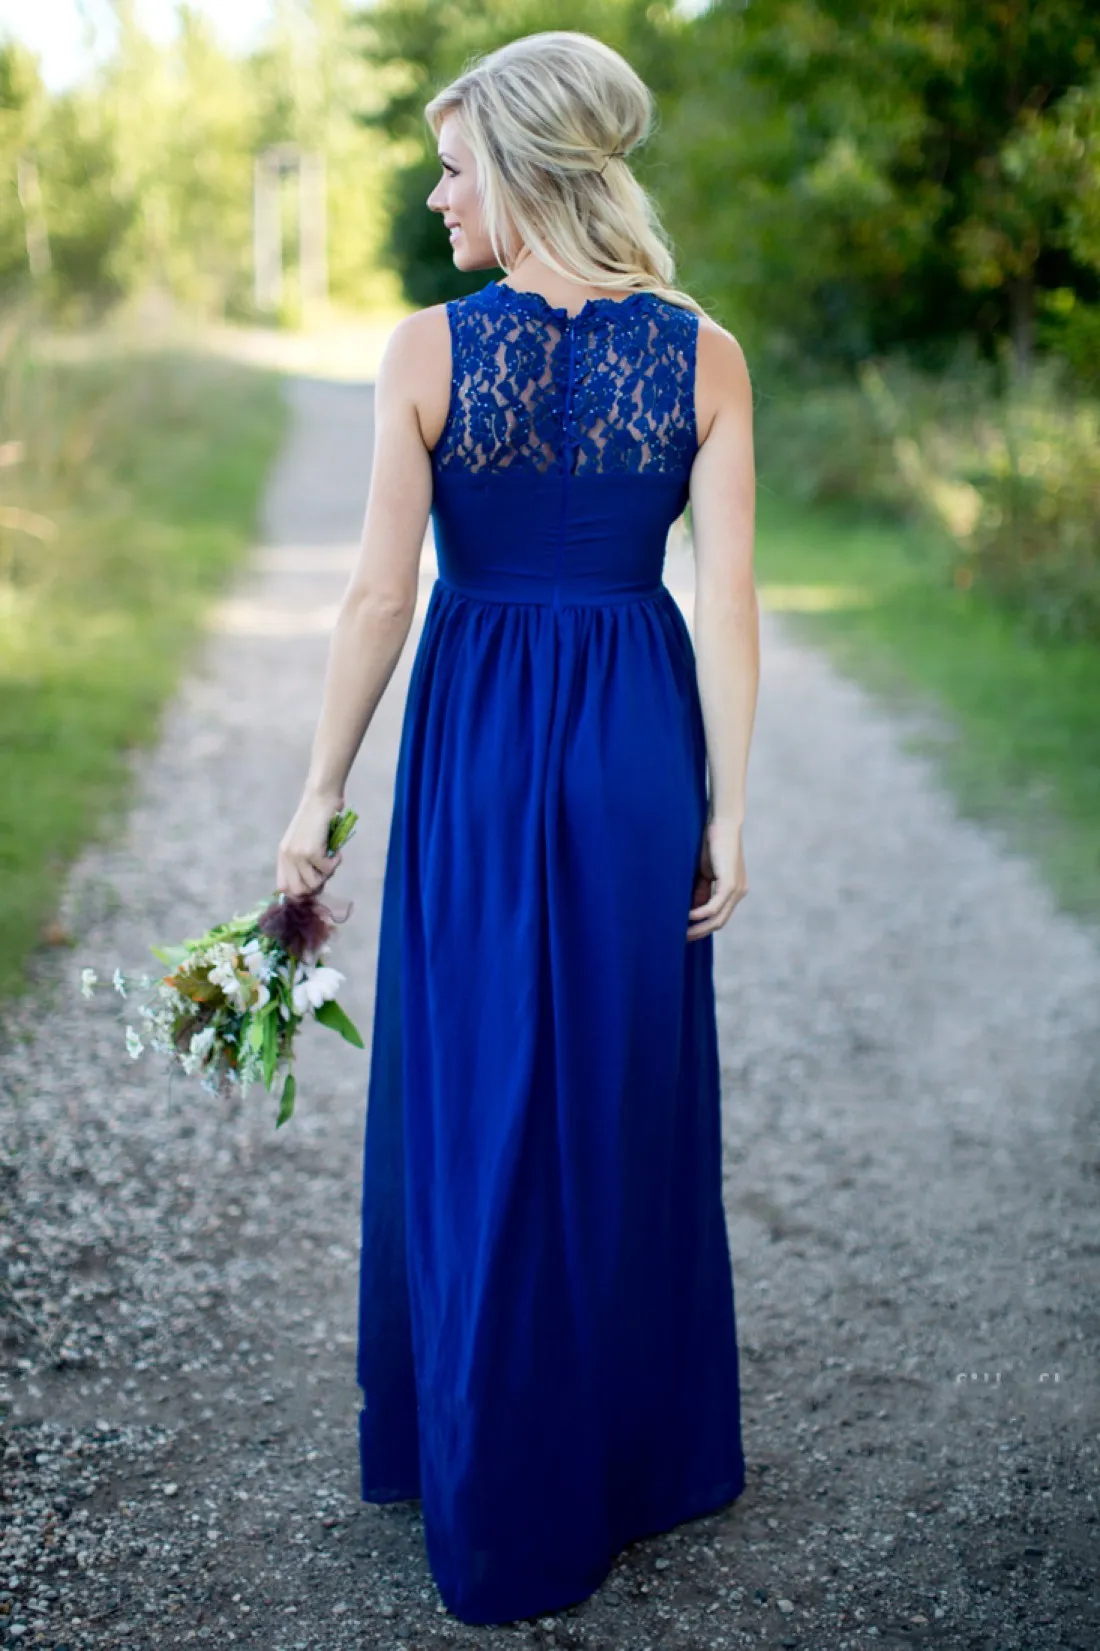 2020 Country Royal Blue Bridesmaid Dresses For Weddings Chiffon Lace Illusion Jewel Neck Beads Plus Size Party Maid Of Honor Gowns Under 100